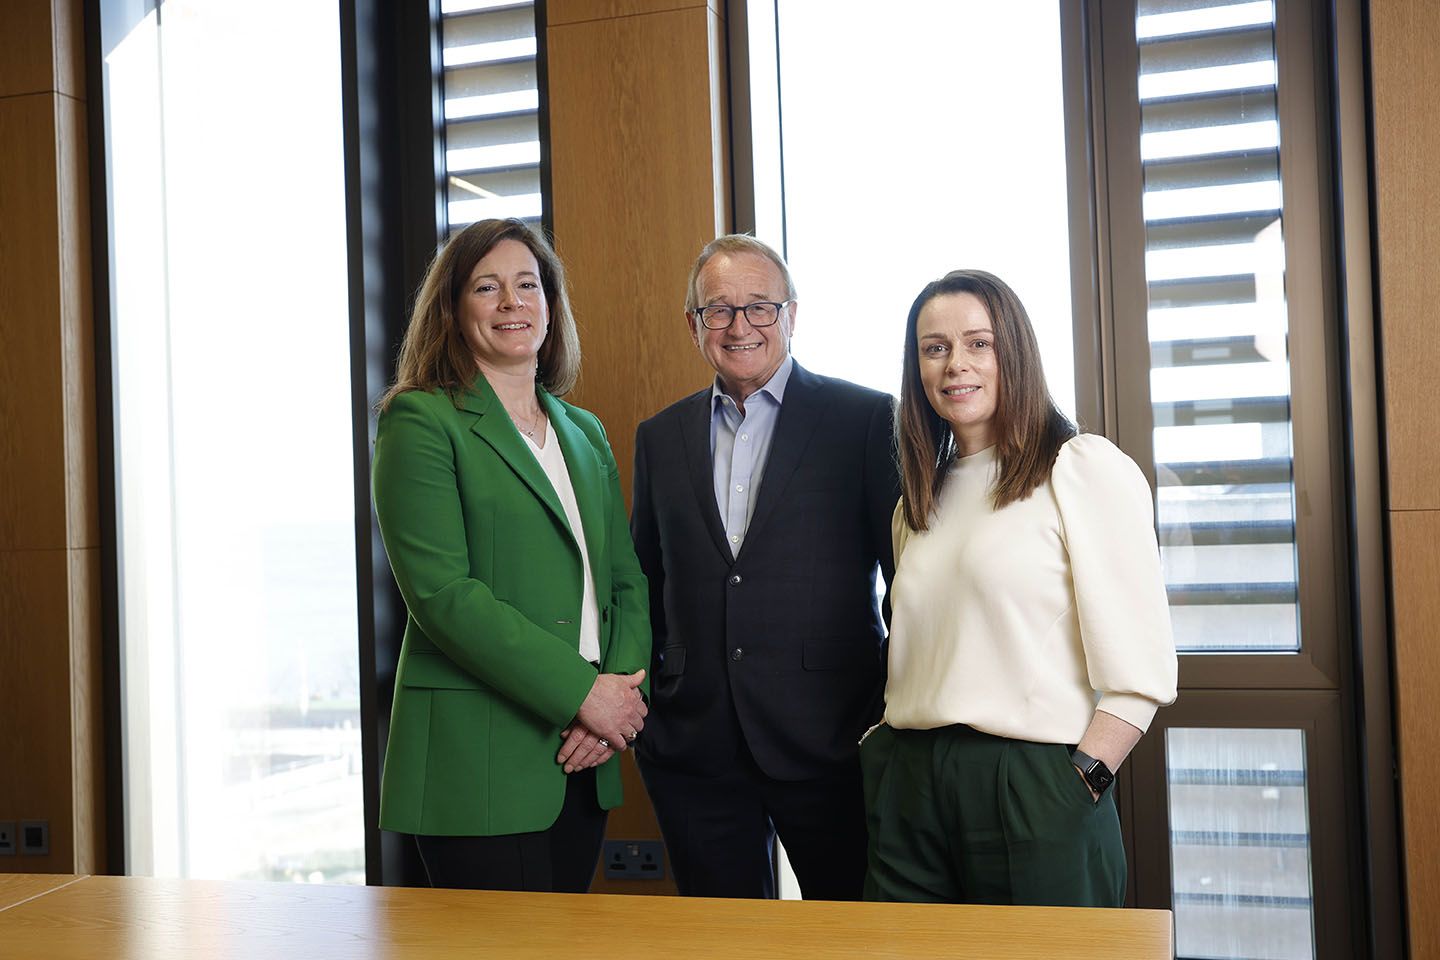 Aengus Consulting Ltd announces the appointment of two new directors